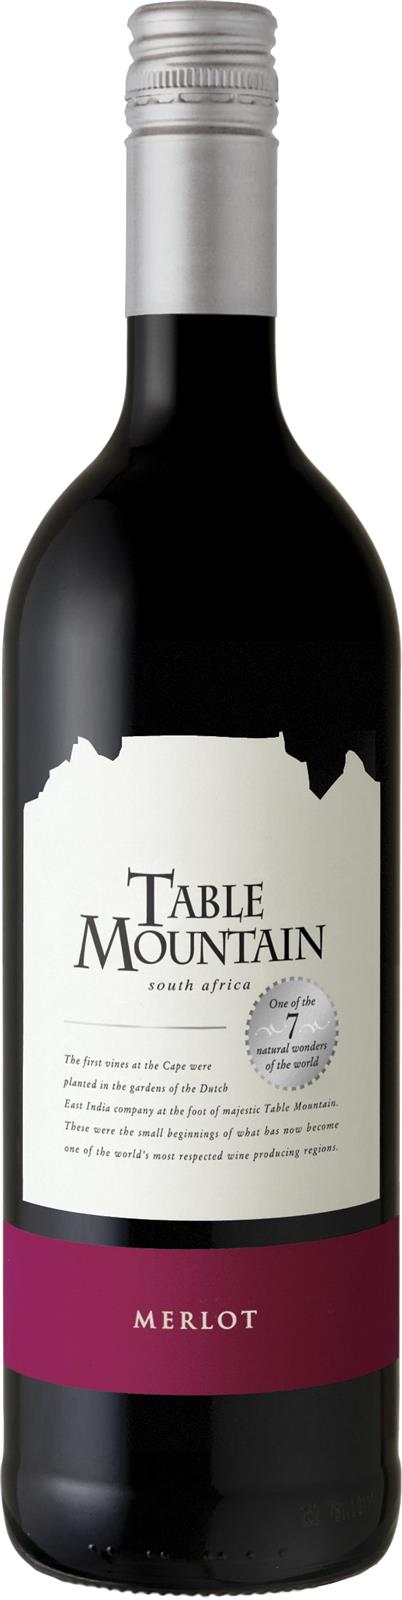 Table Mountain Western Cape Merlot 2019 (South Africa). 